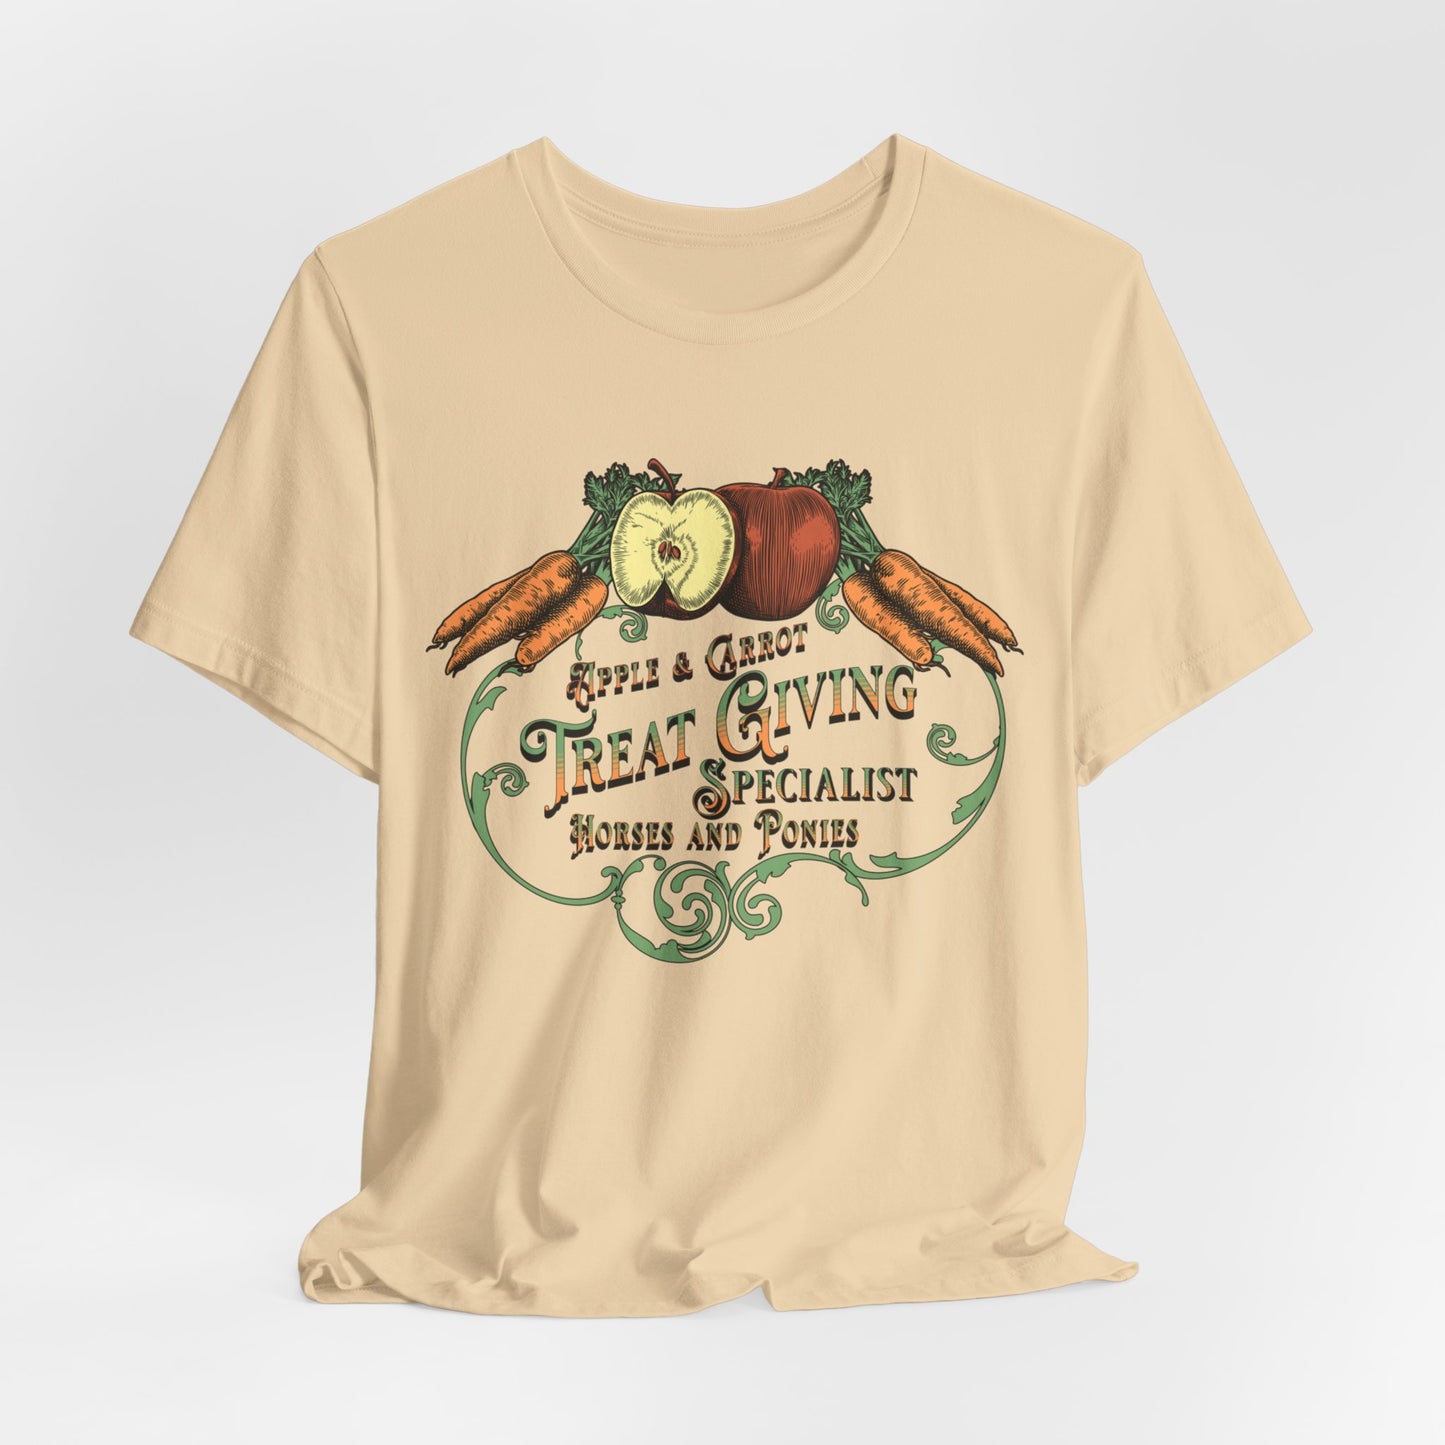 Apple and Carrot Treat Giving Specialist, cute Equestrian Tee